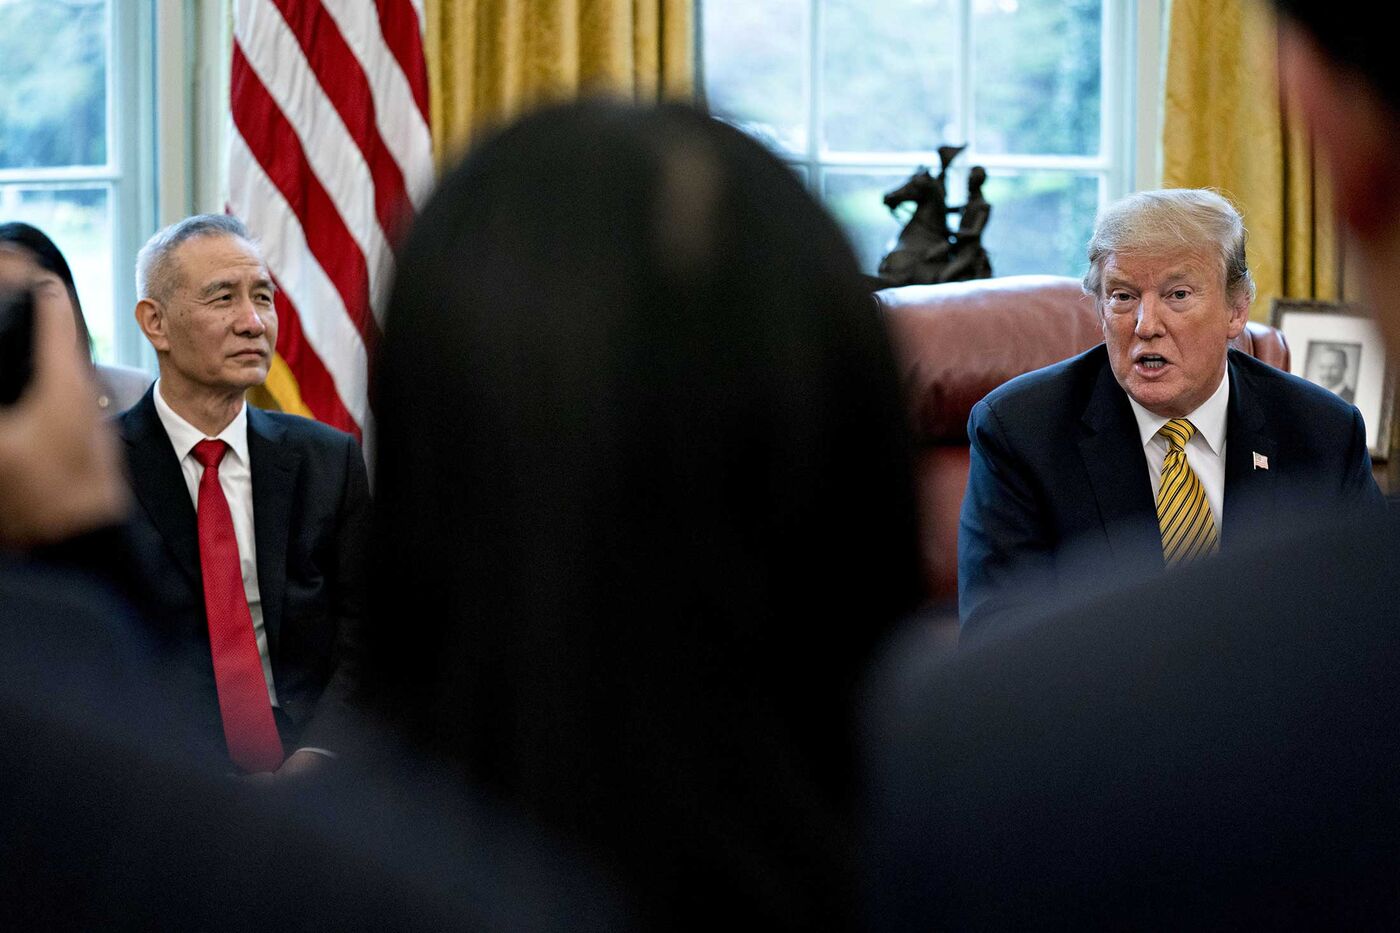 Trump with Chinese Vice Premier Liu He at a meeting in the Oval Office of the White House on April 4, 2019.